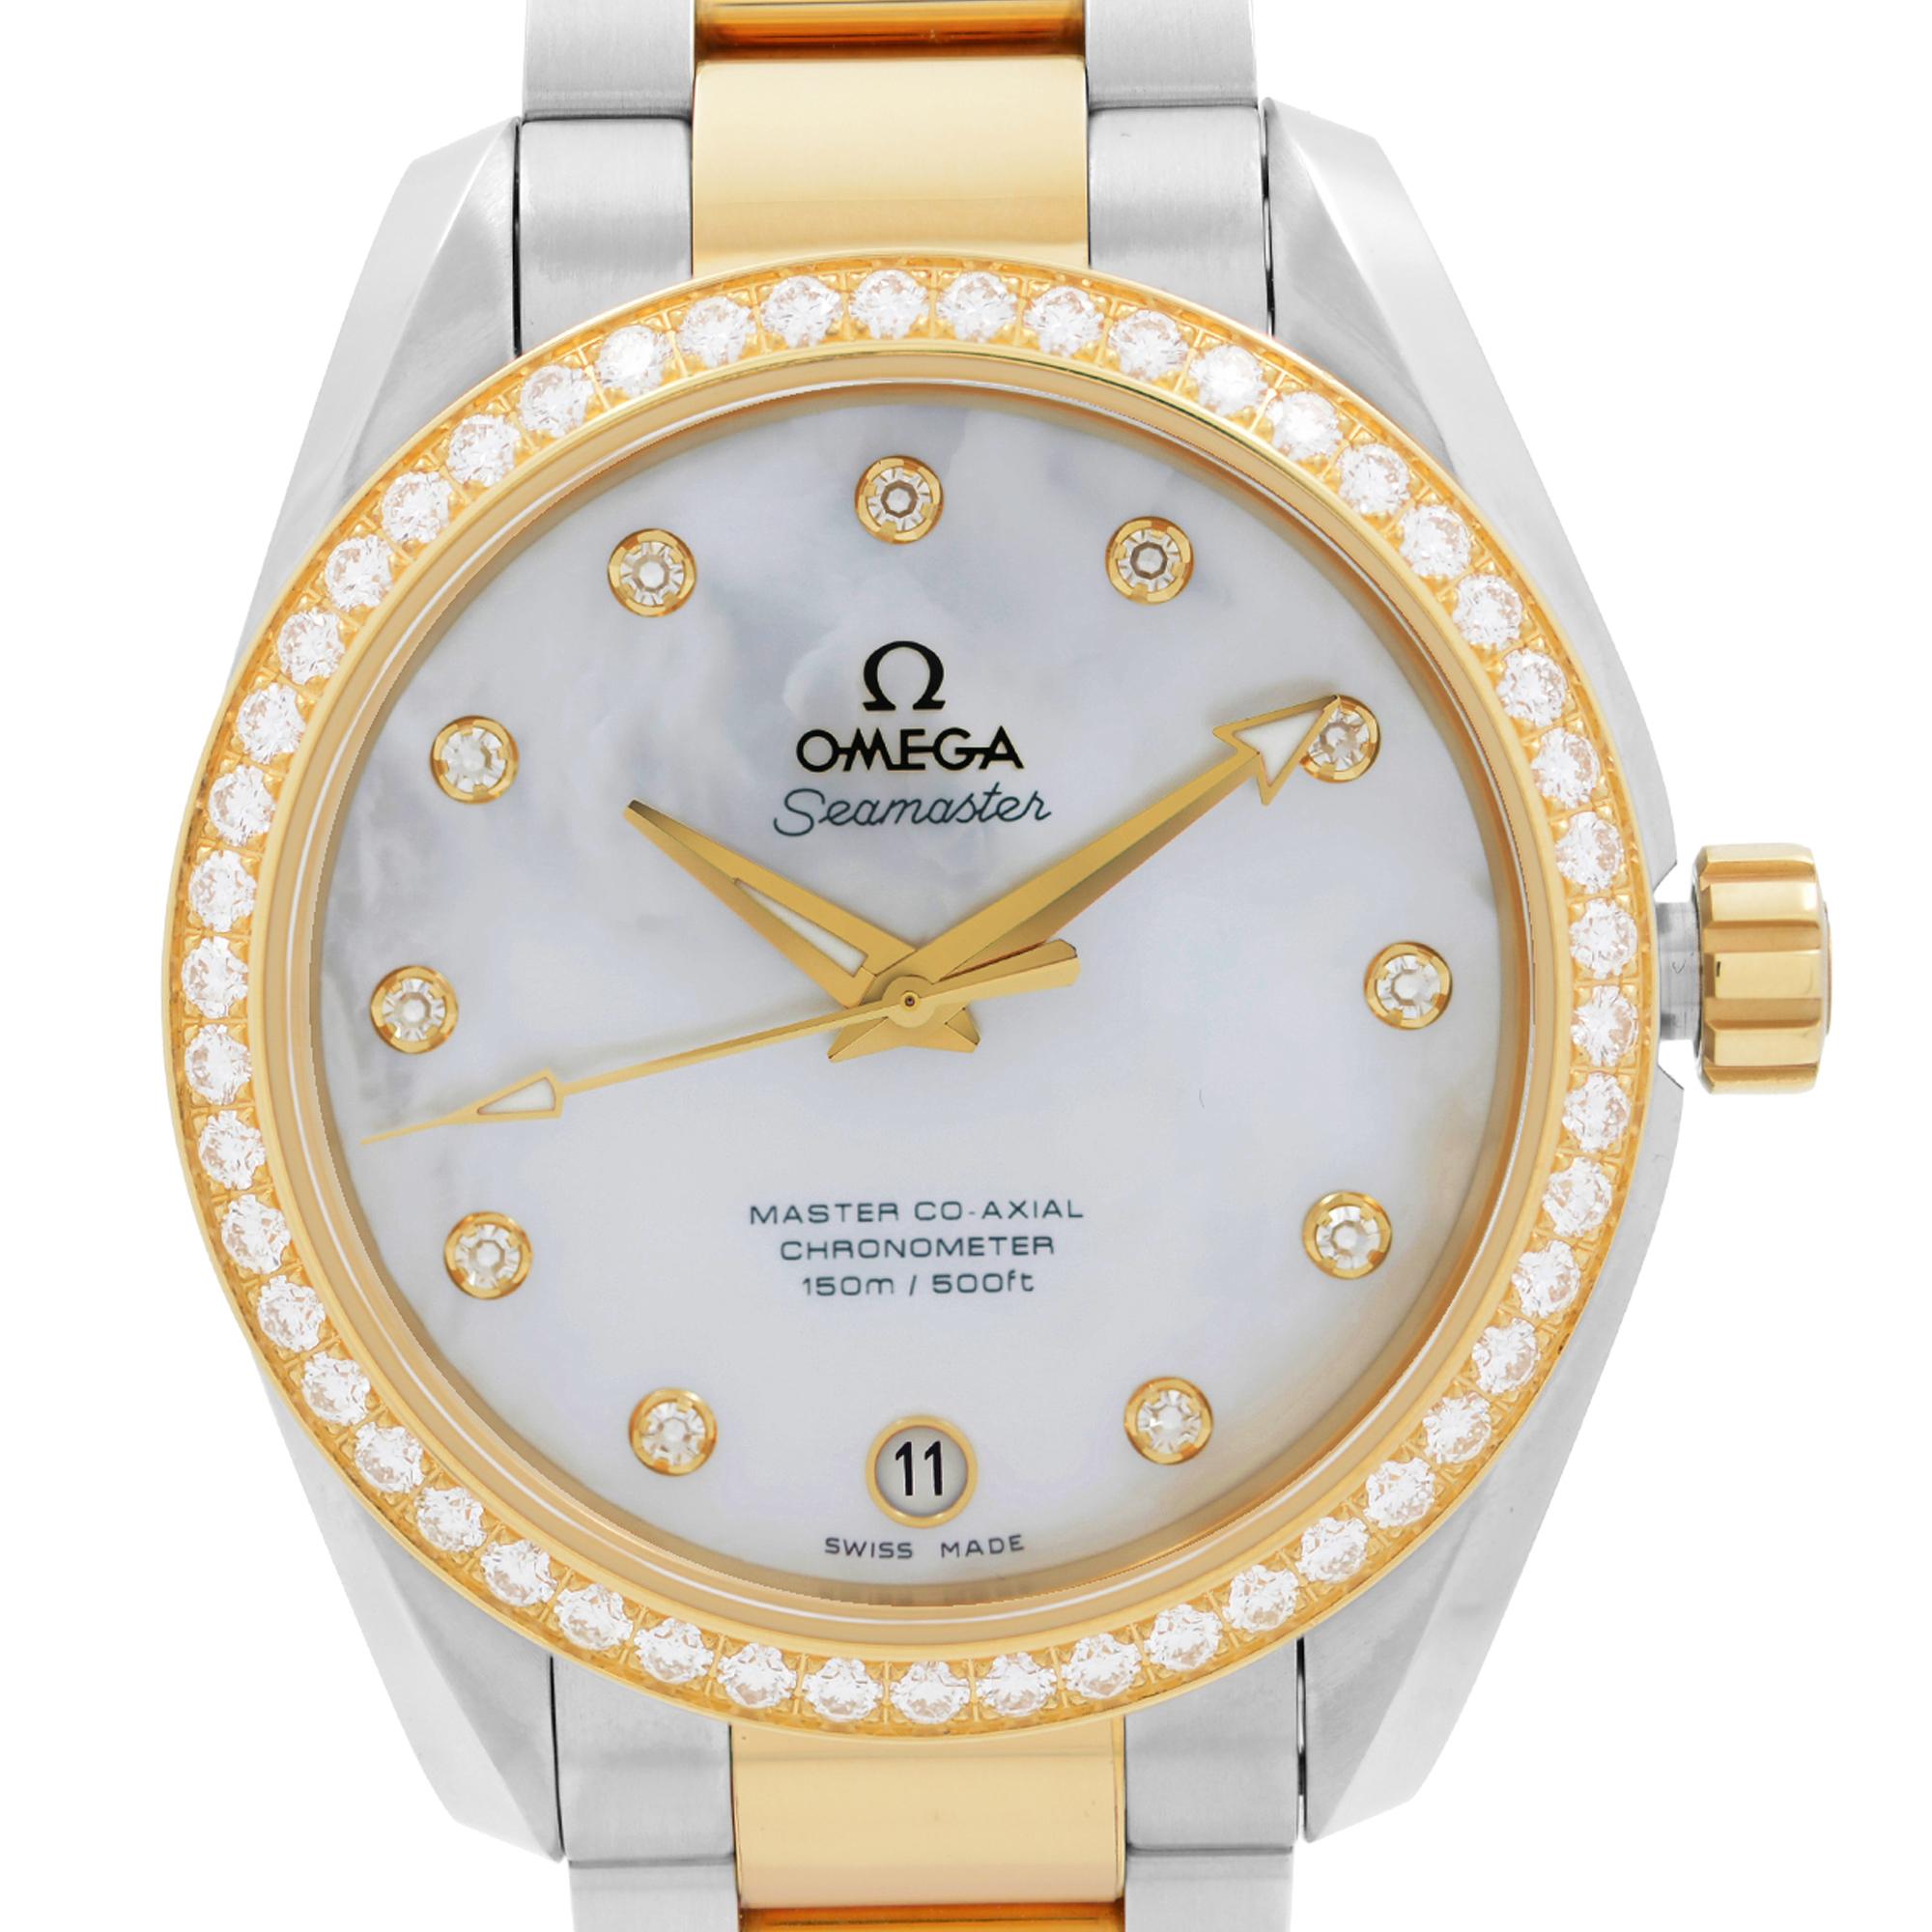 Unwarm Omega Seamaster Aqua Terra Steel Gold Diamond White MOP Dial Men's Watch 231.25.39.21.55.002. This Beautiful Timepiece is Powered by Mechanical (Automatic) Movement And Features: Round Stainless Steel Case with a Stainless Steel with 18k